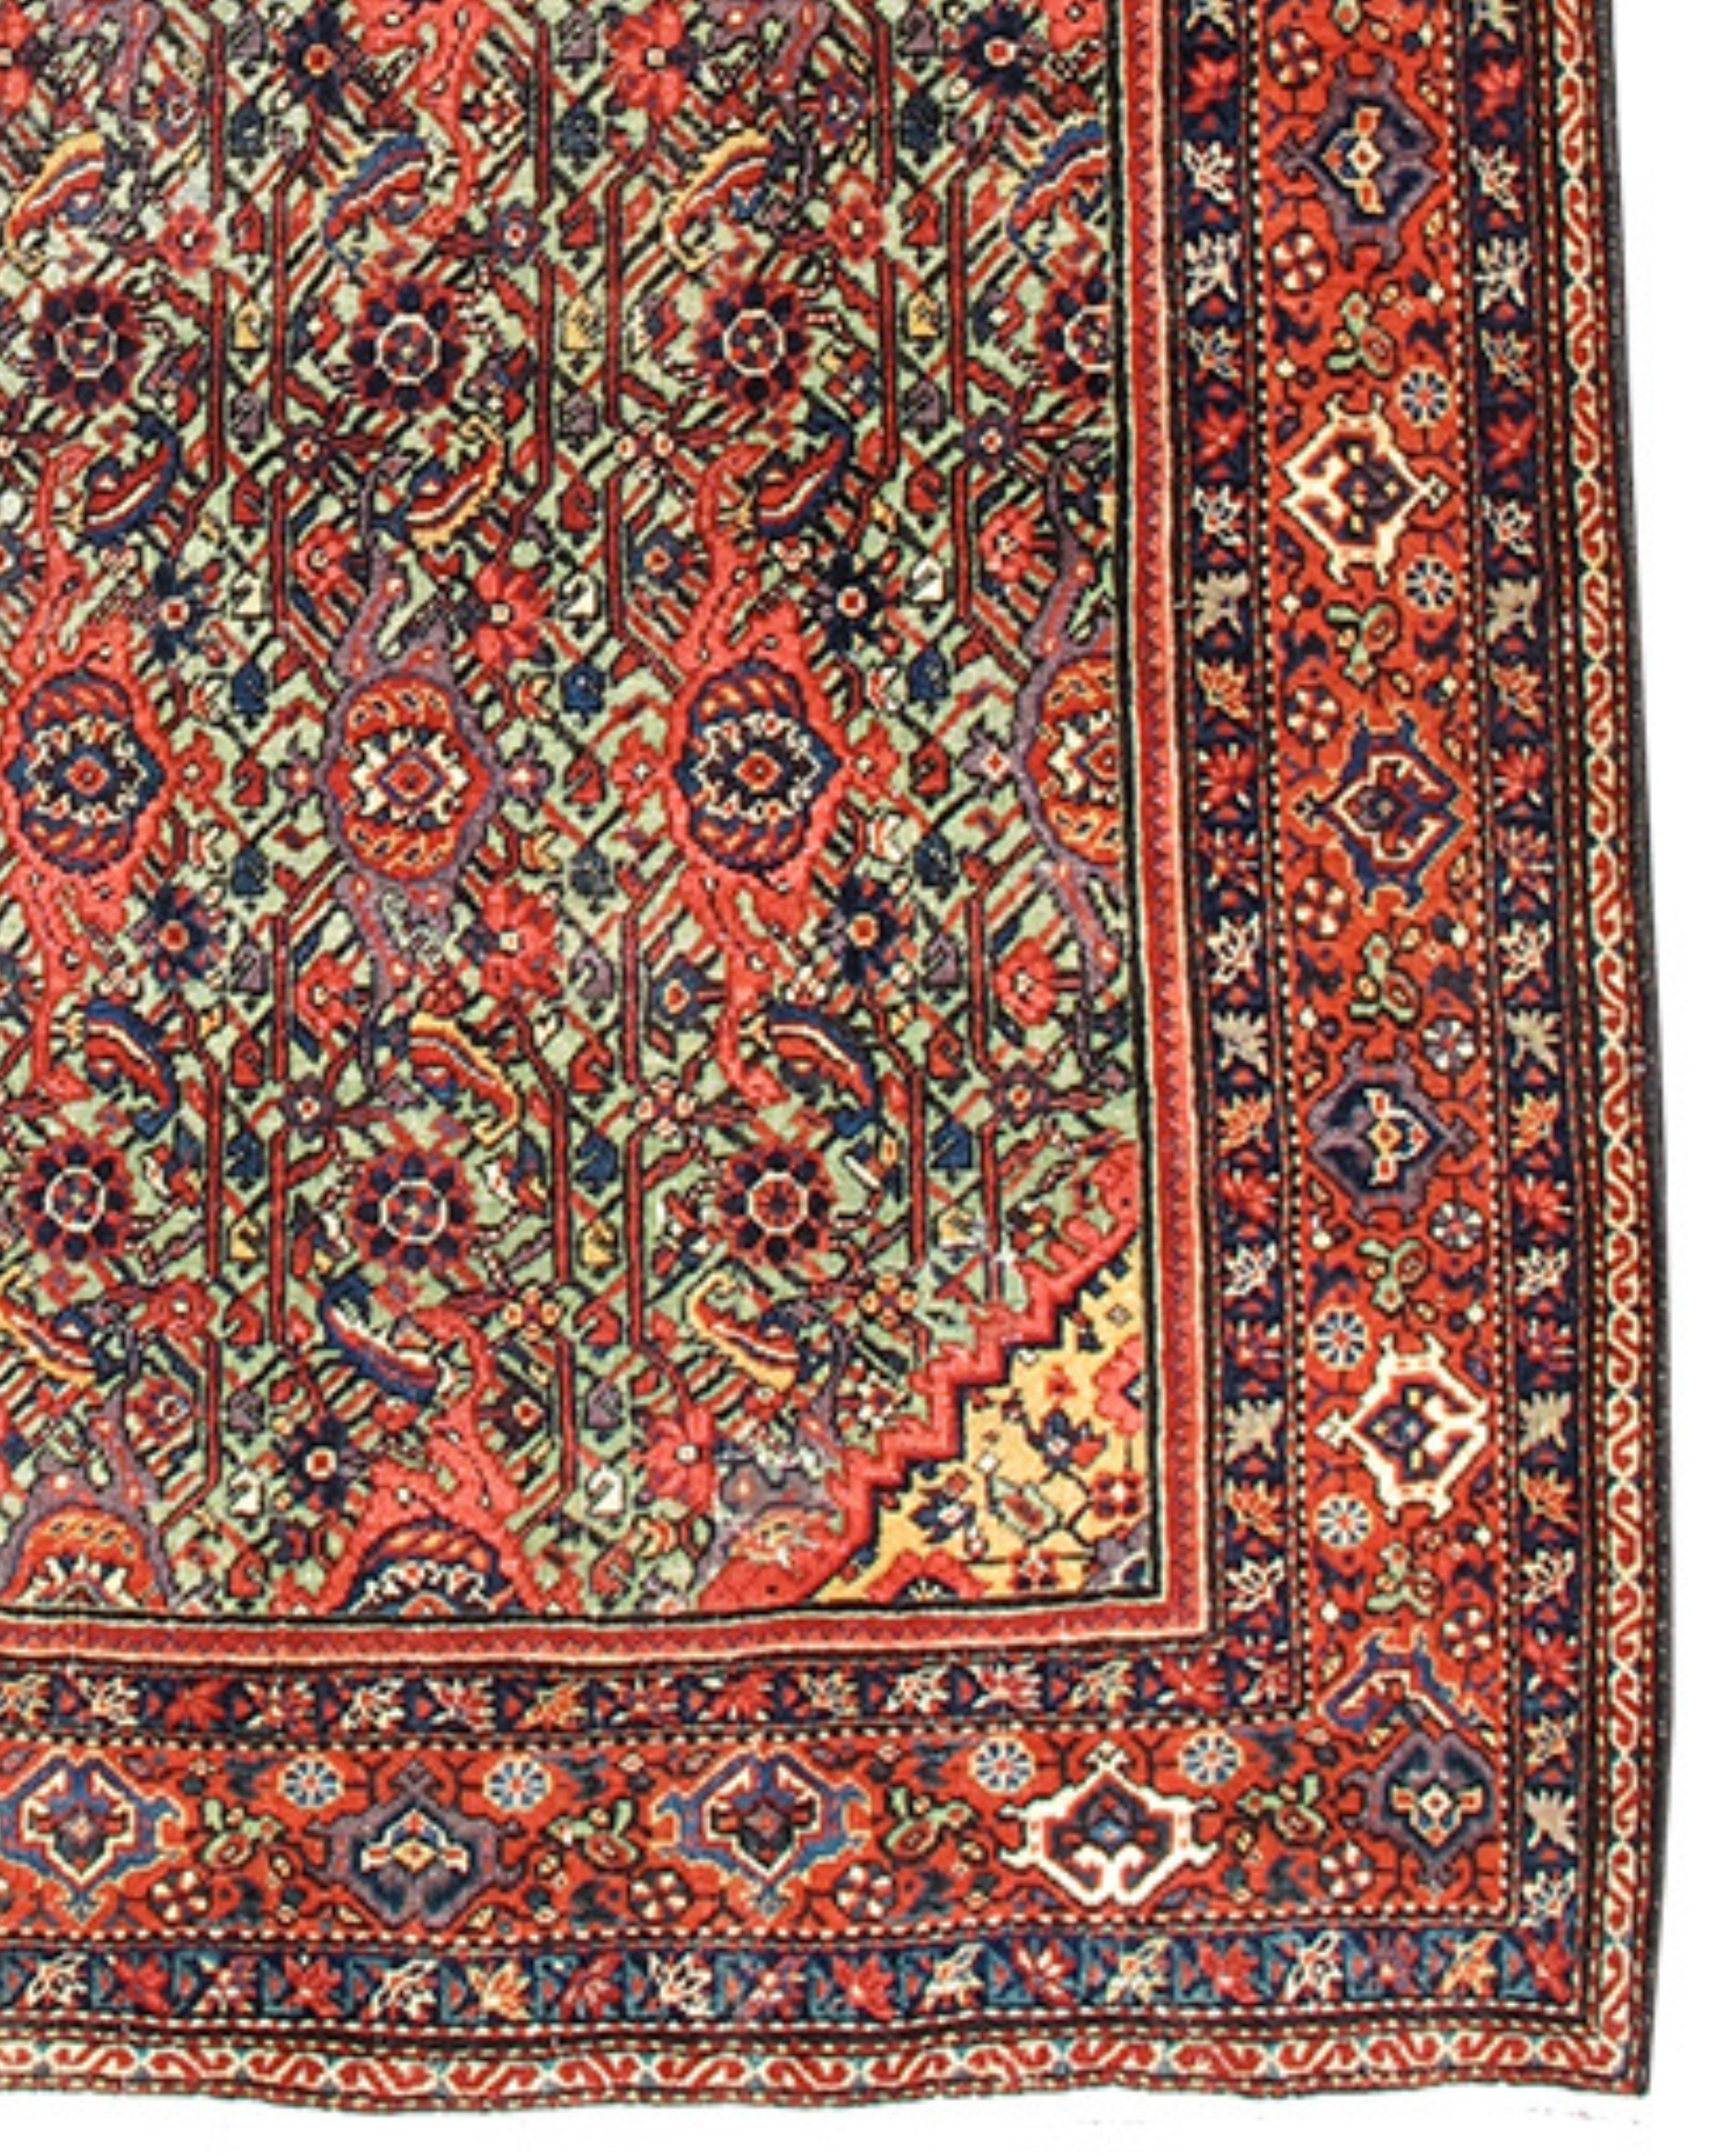 Fereghan Rug, 19th Century In Excellent Condition For Sale In San Francisco, CA